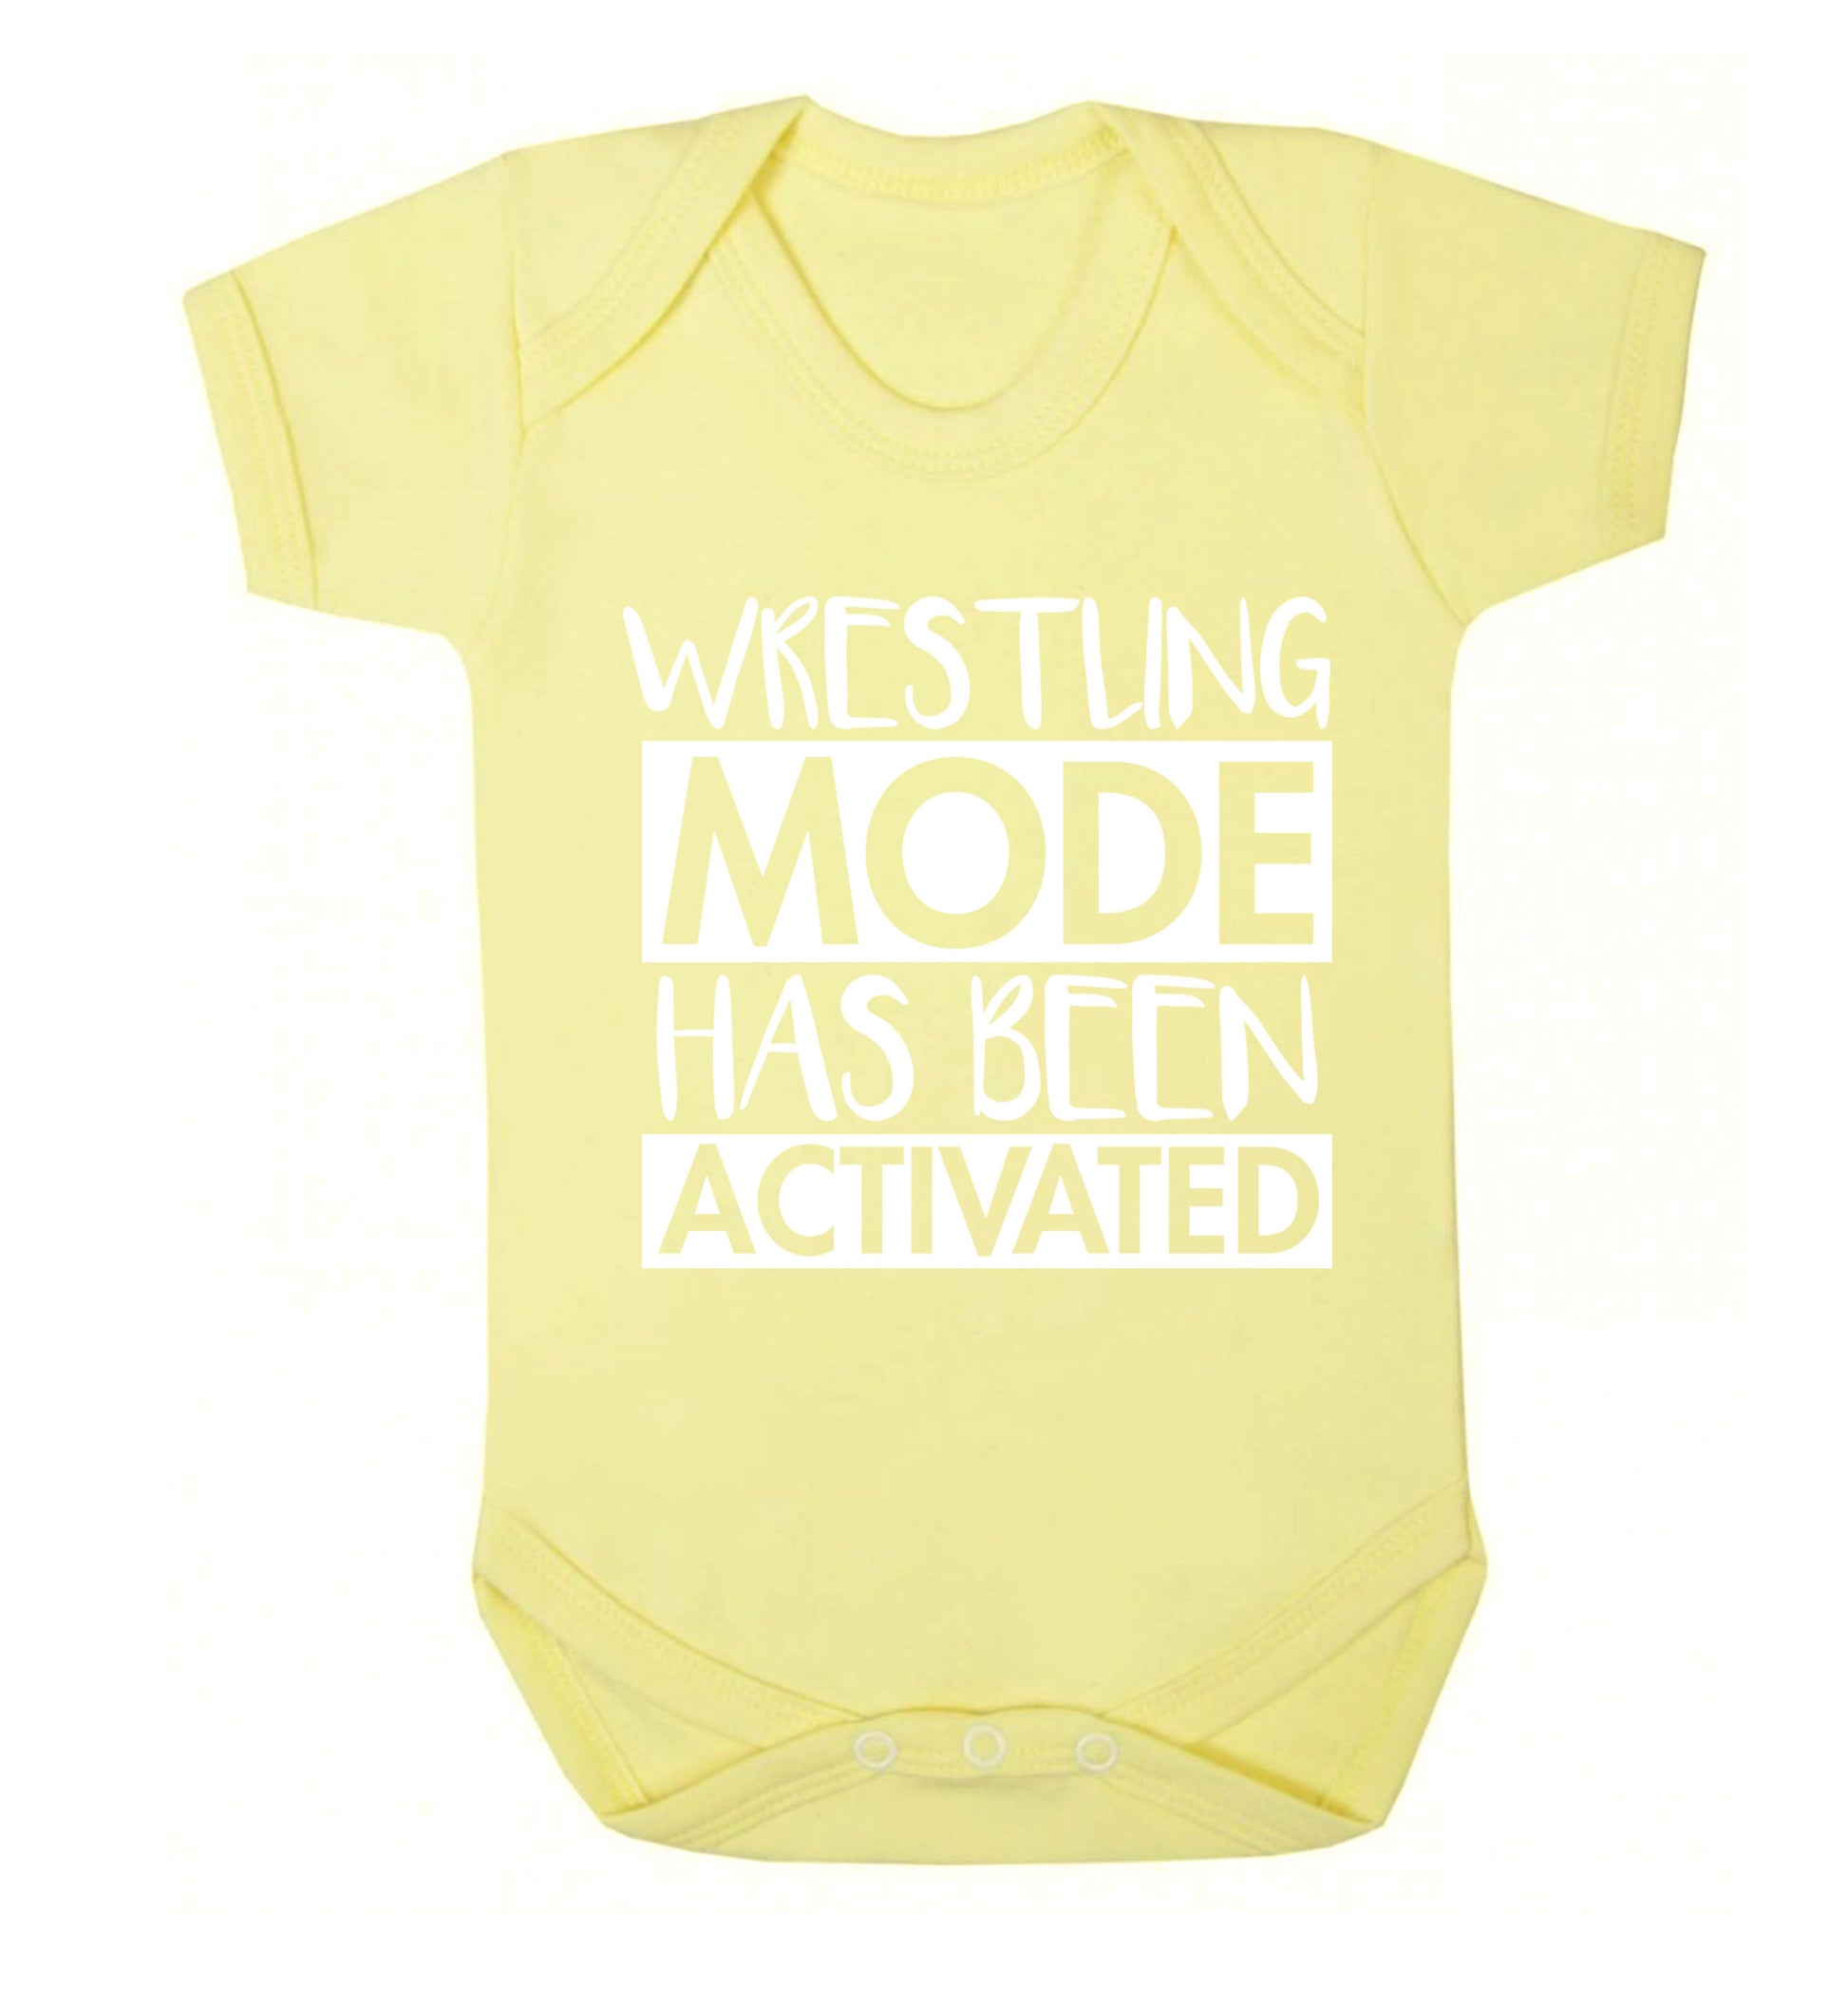 Wresting mode activated Baby Vest pale yellow 18-24 months